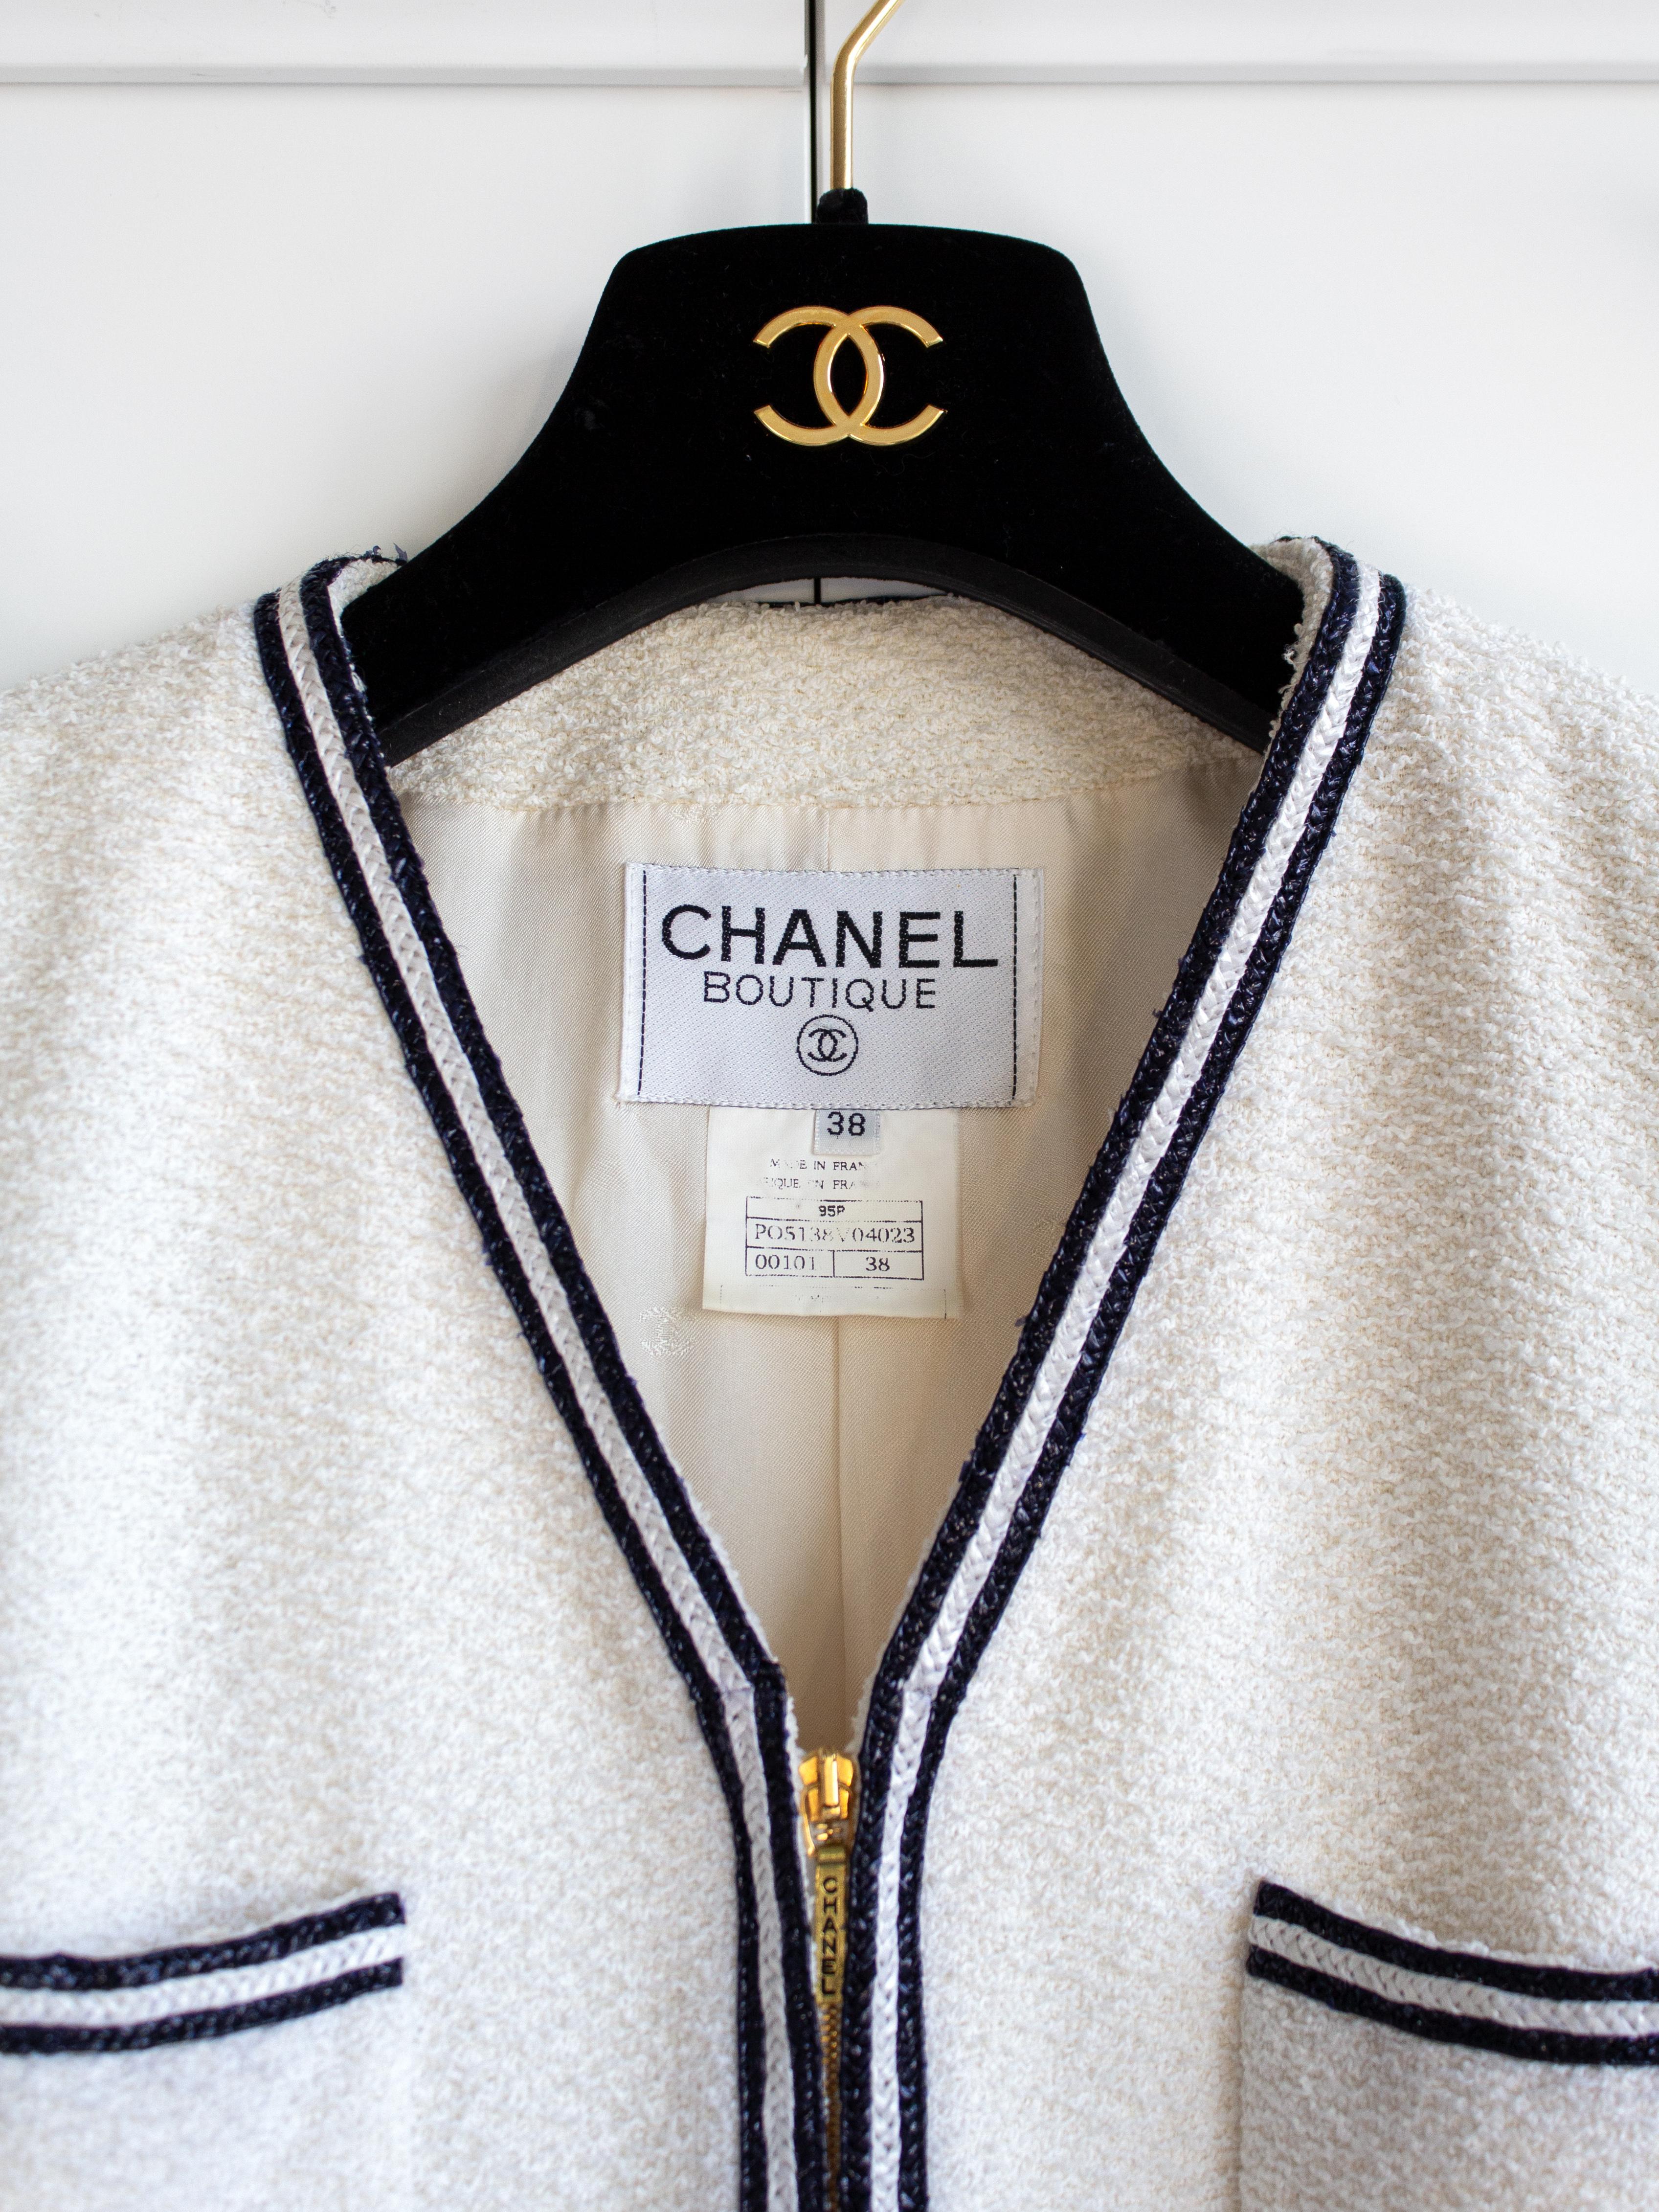 Chanel Vintage S/S 1995 White Ivory Black Tweed 95P Jacket Skirt Suit For Sale 1